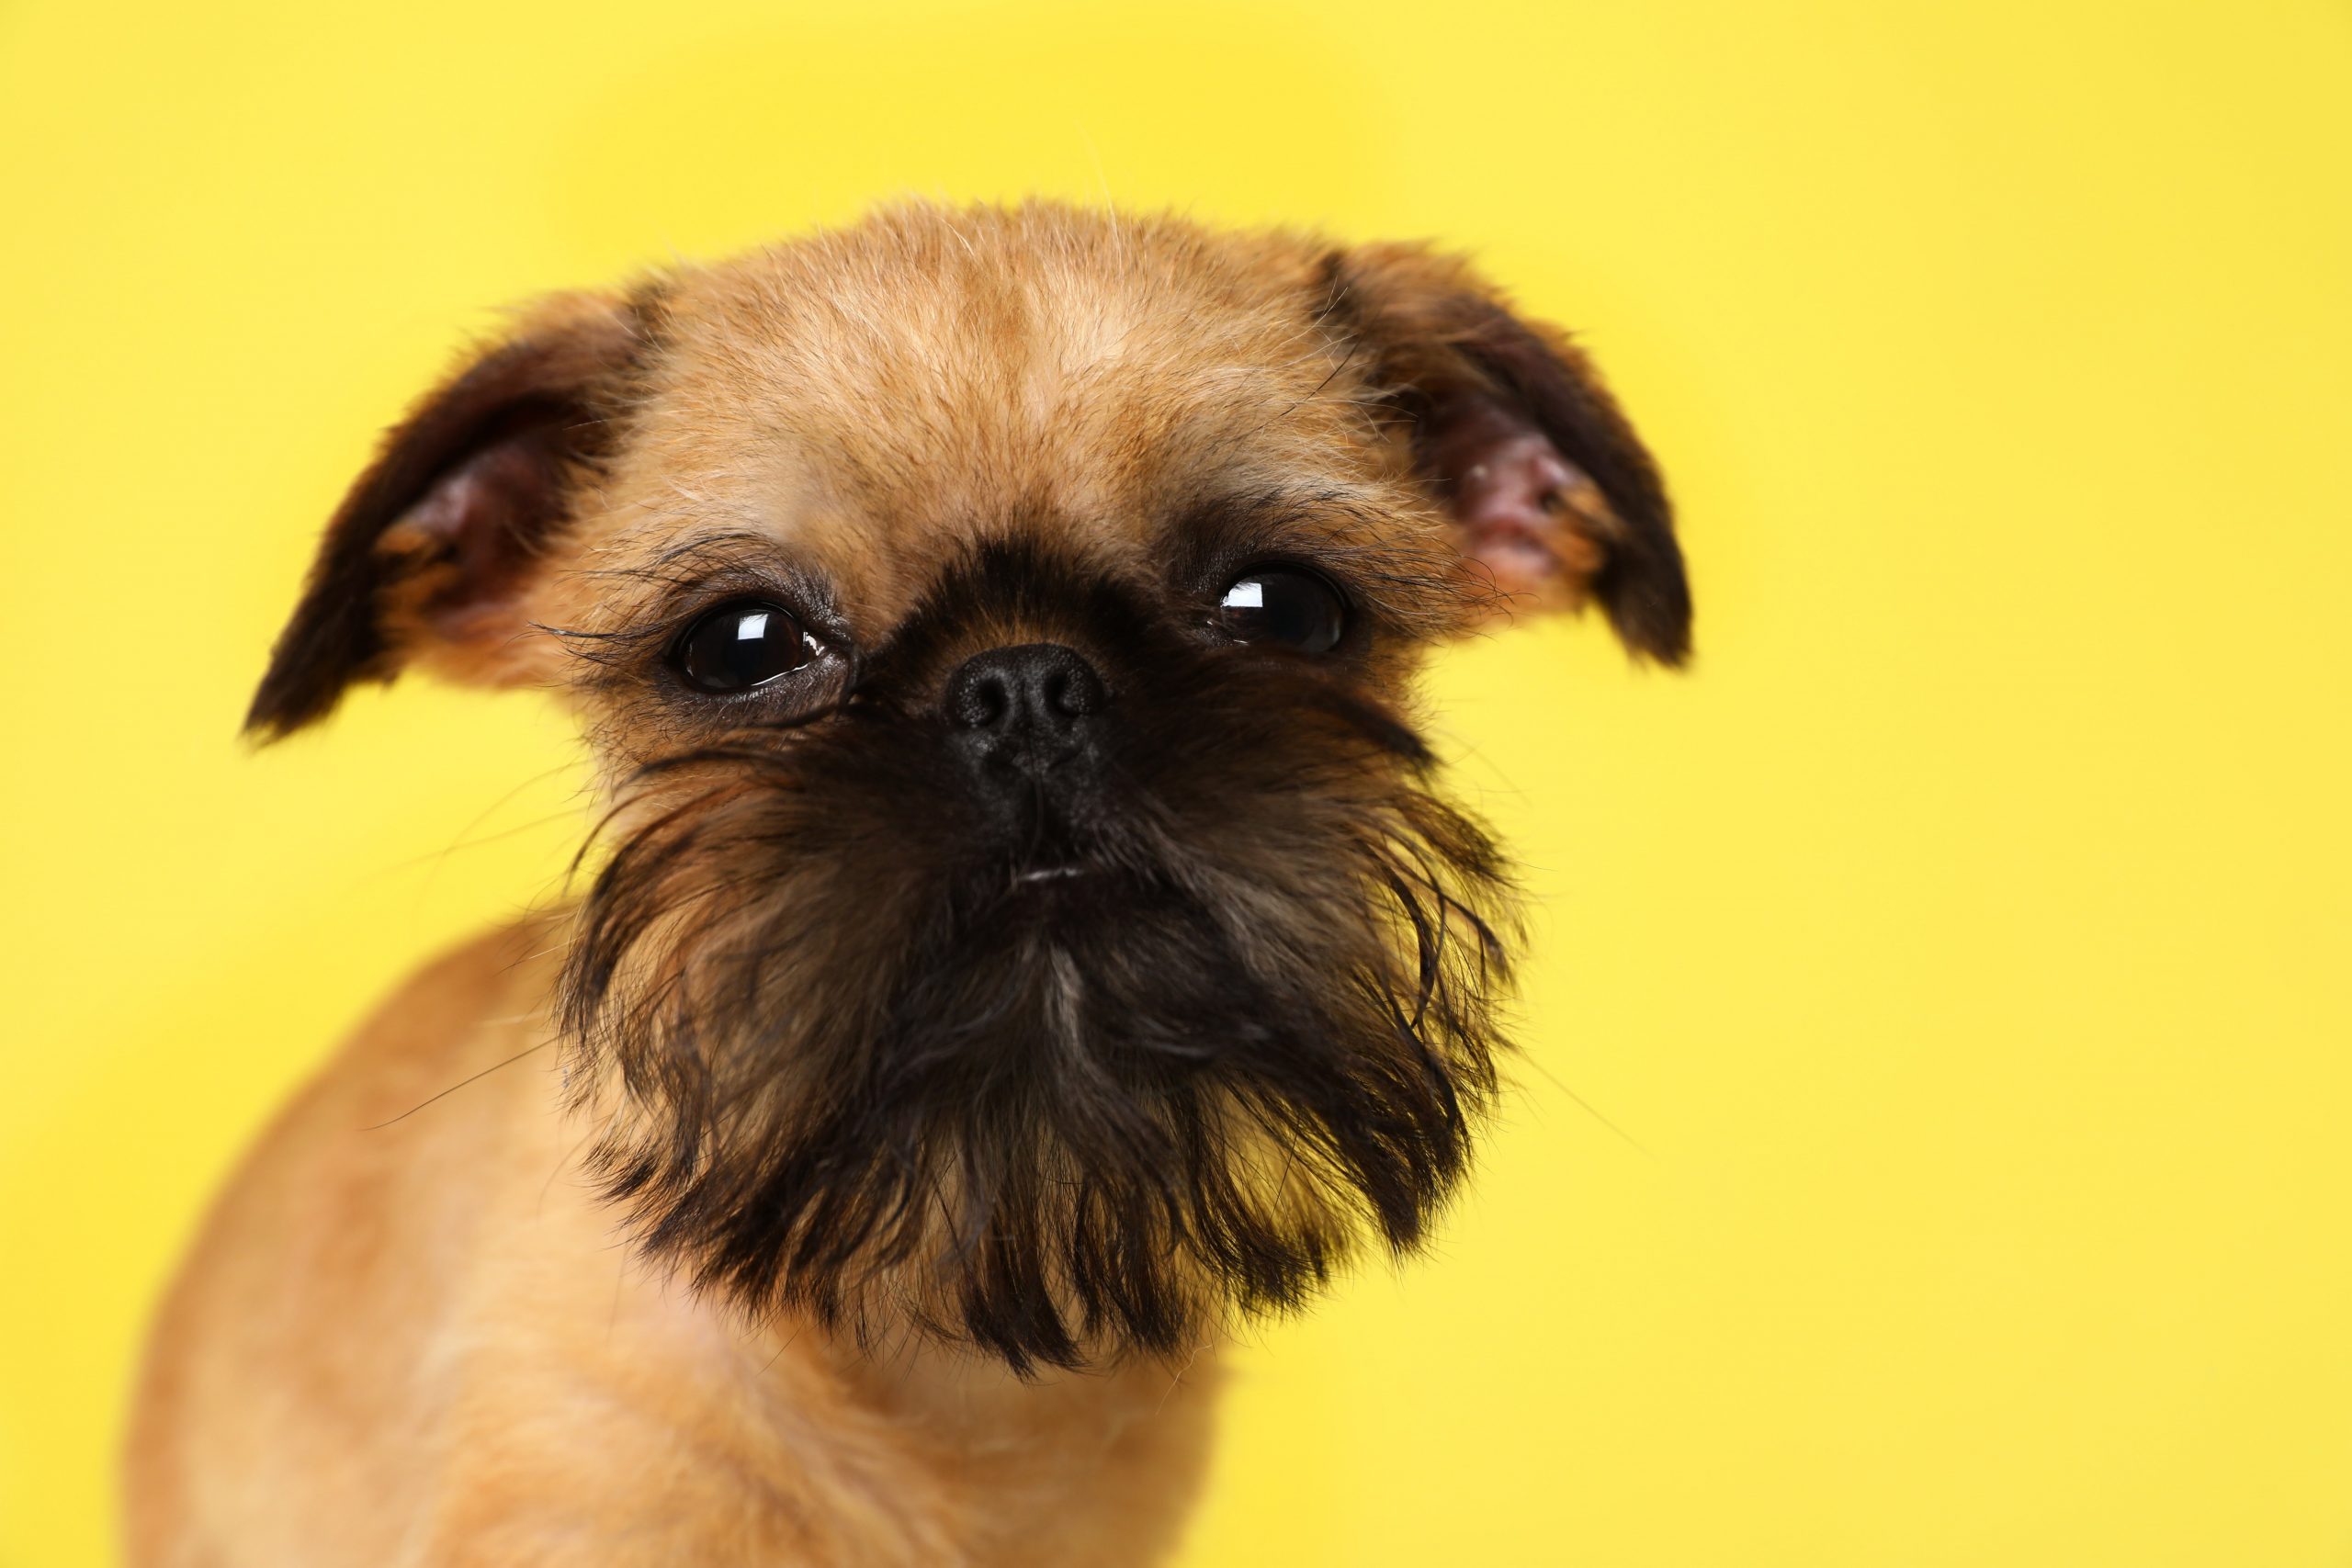 10 Adorable Dogs That Stay Small | Reader's Digest Canada